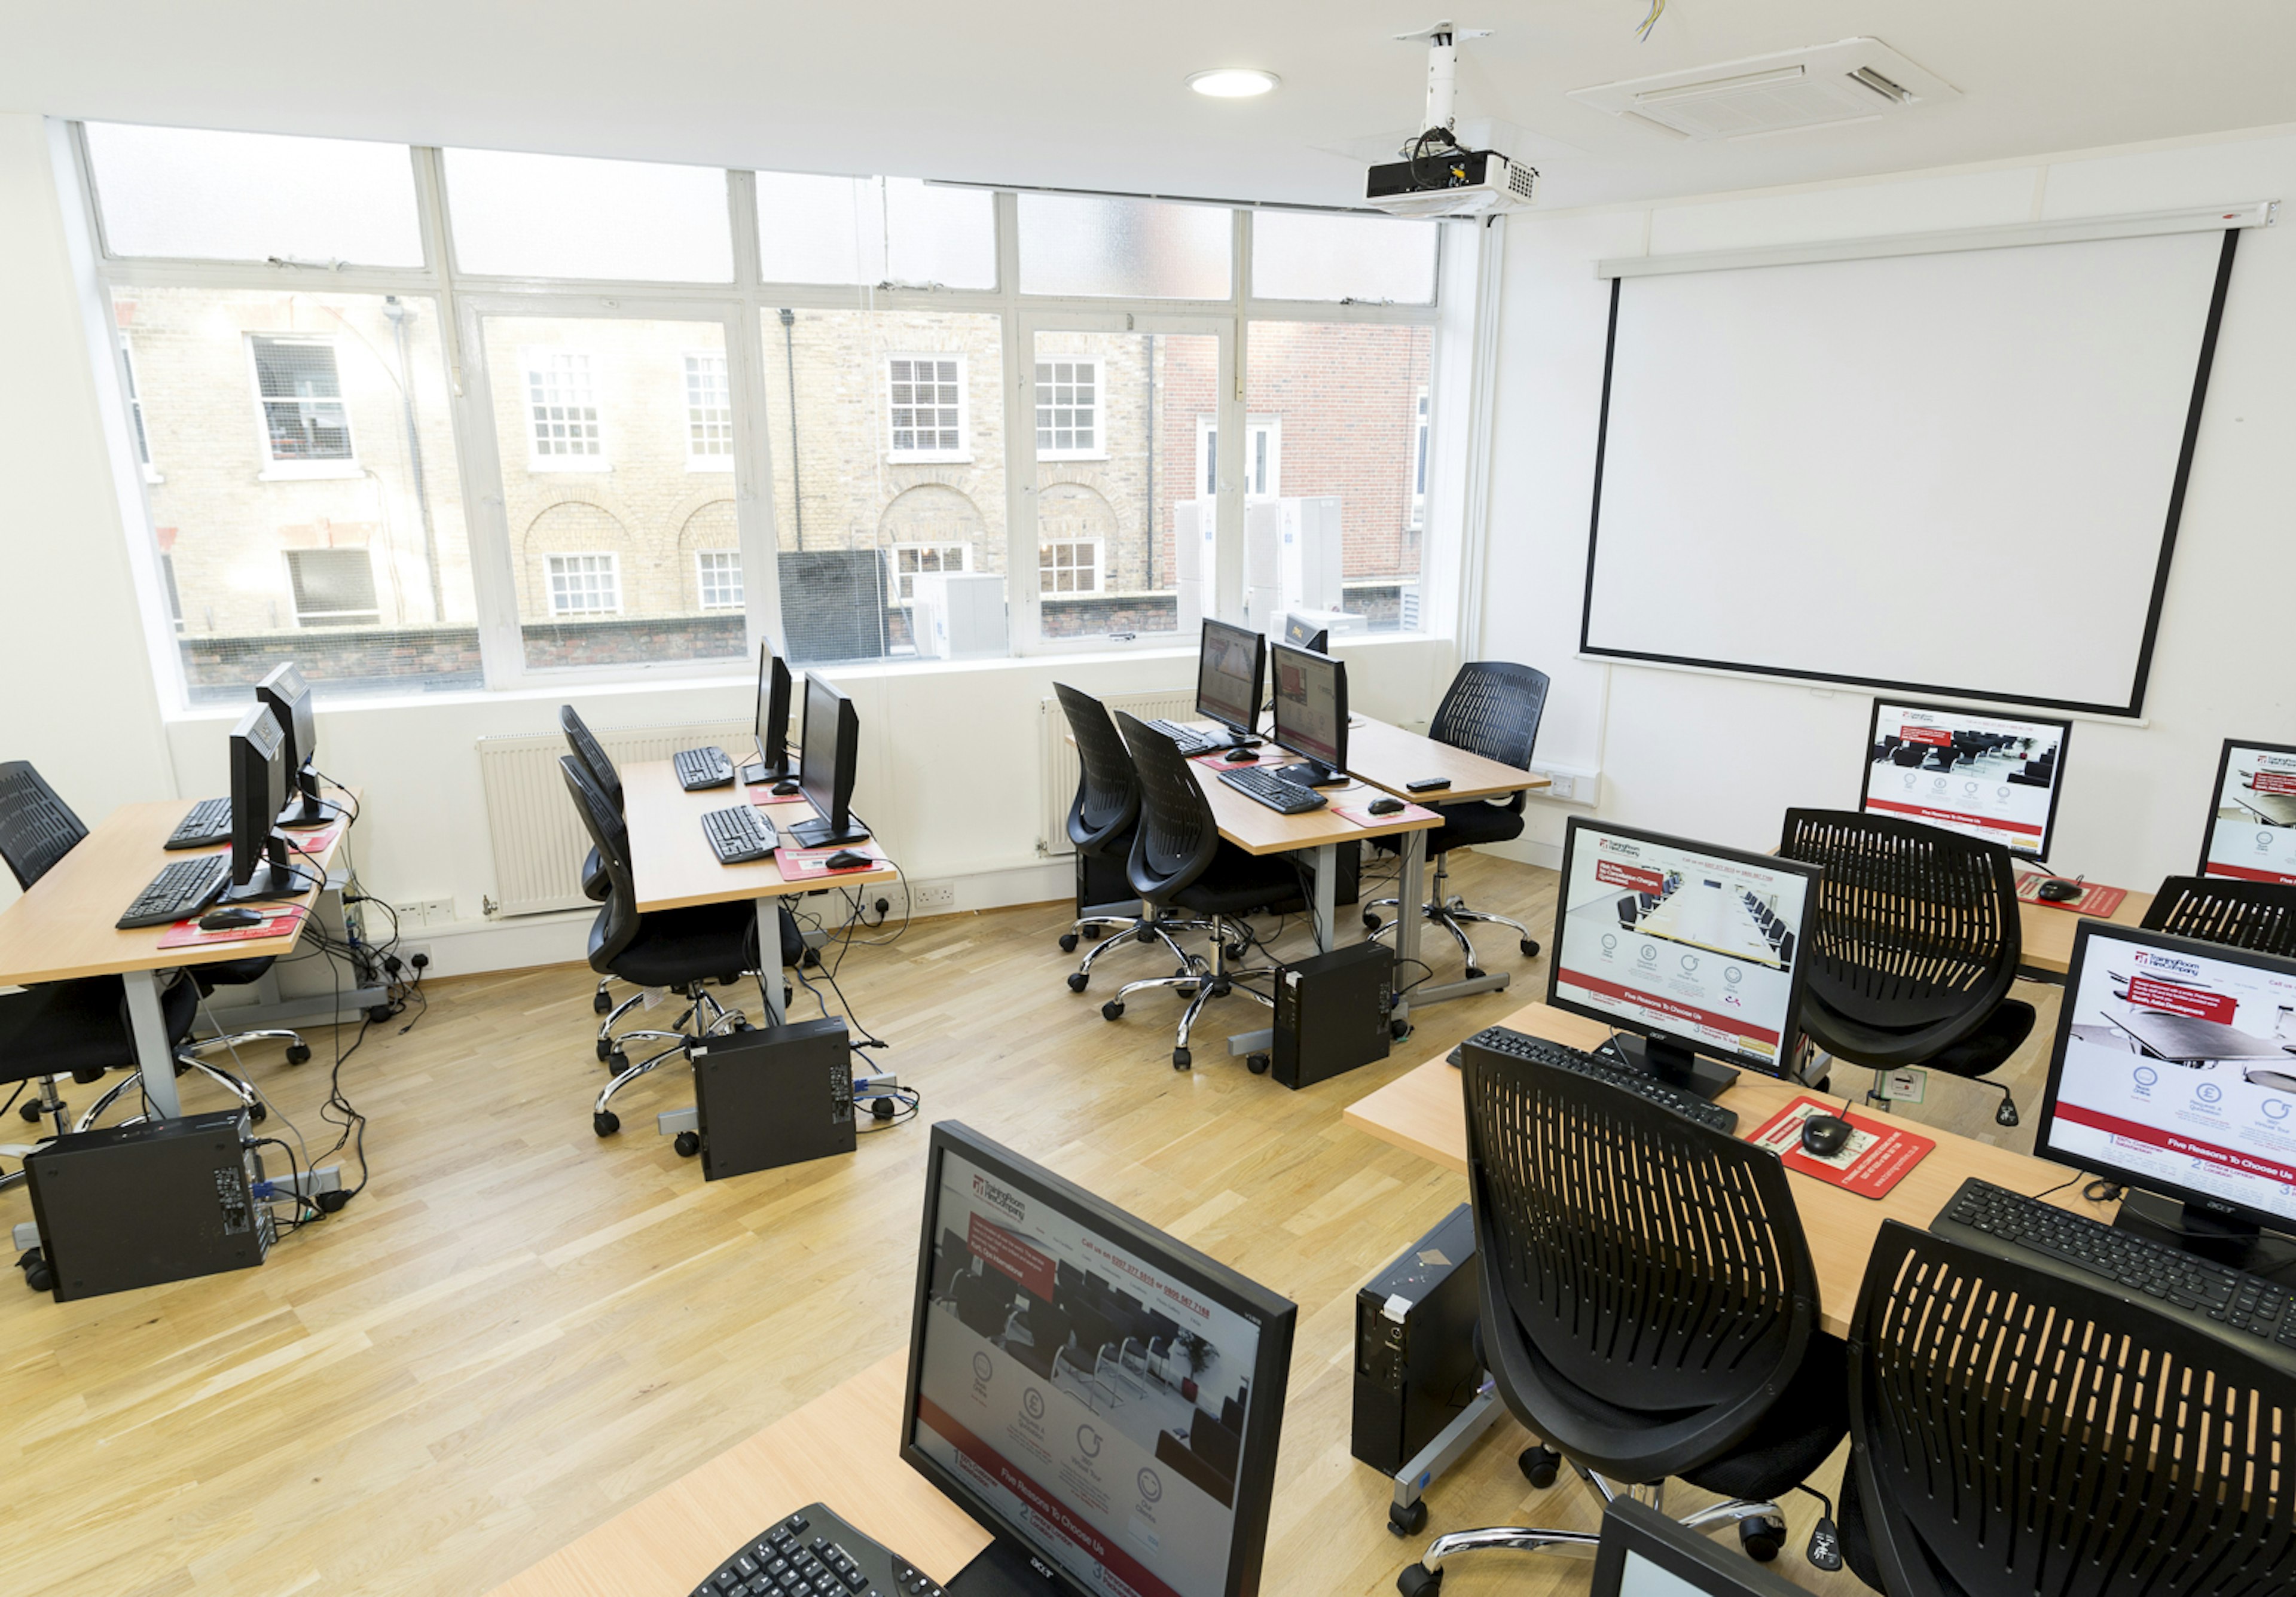 Business - The Training Room Hire Company